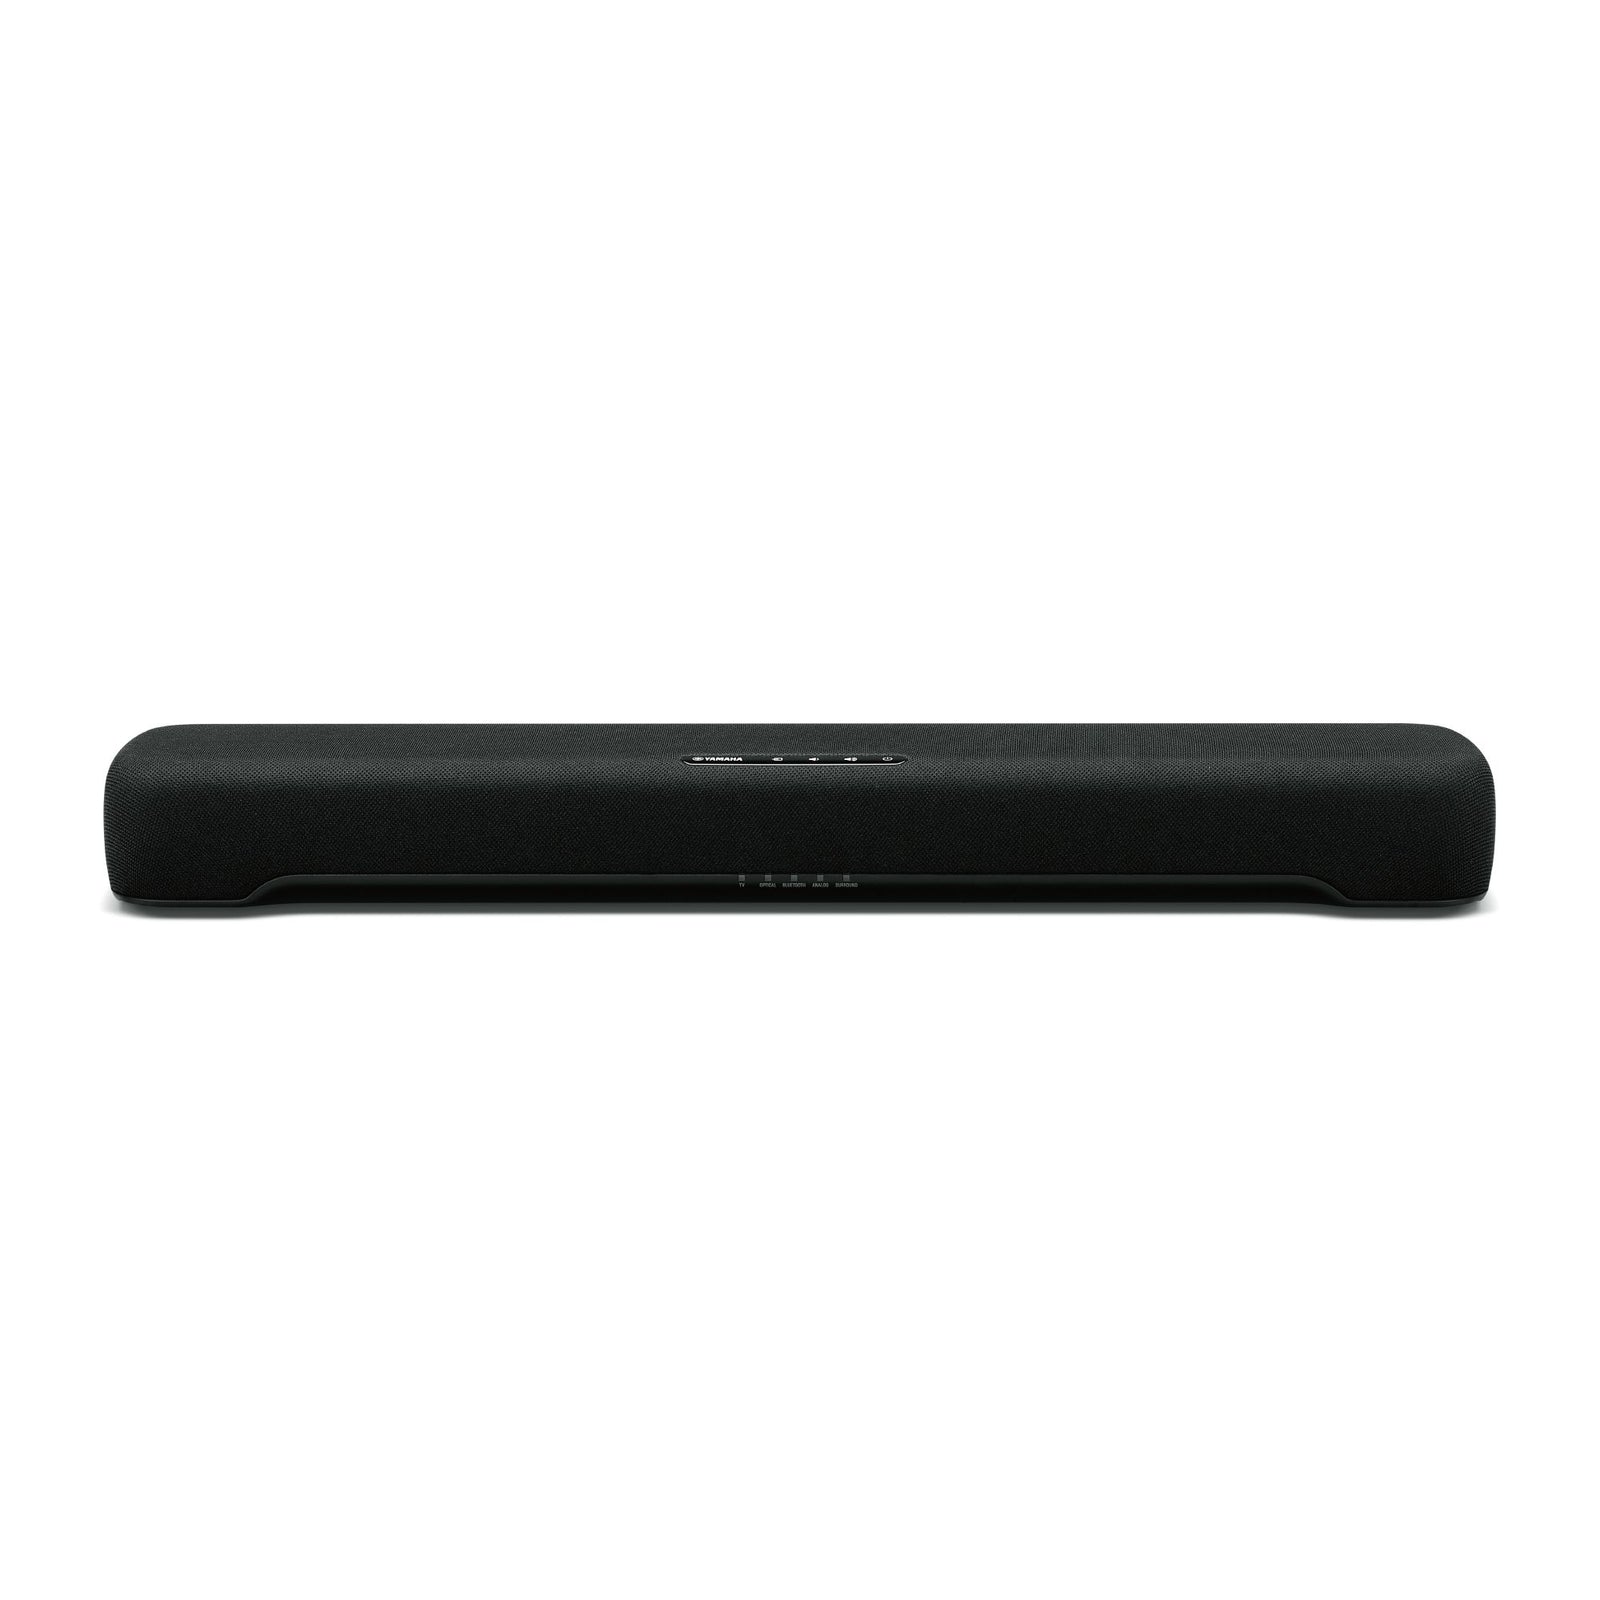 YAMAHA SR-C20A - SOUND BARS | VINYL SOUND - Compact Sound Bar with built-in subwoofer, Bluetooth® and Clear Voice. The perfect space-saving solution with uncompromised Clear and Immersive sound and built-in subwoofer. (W600mm x H64mm x D94mm) Clear Voice for enhanced dialogue quality Bluetooth® connectivity for streaming wireless music